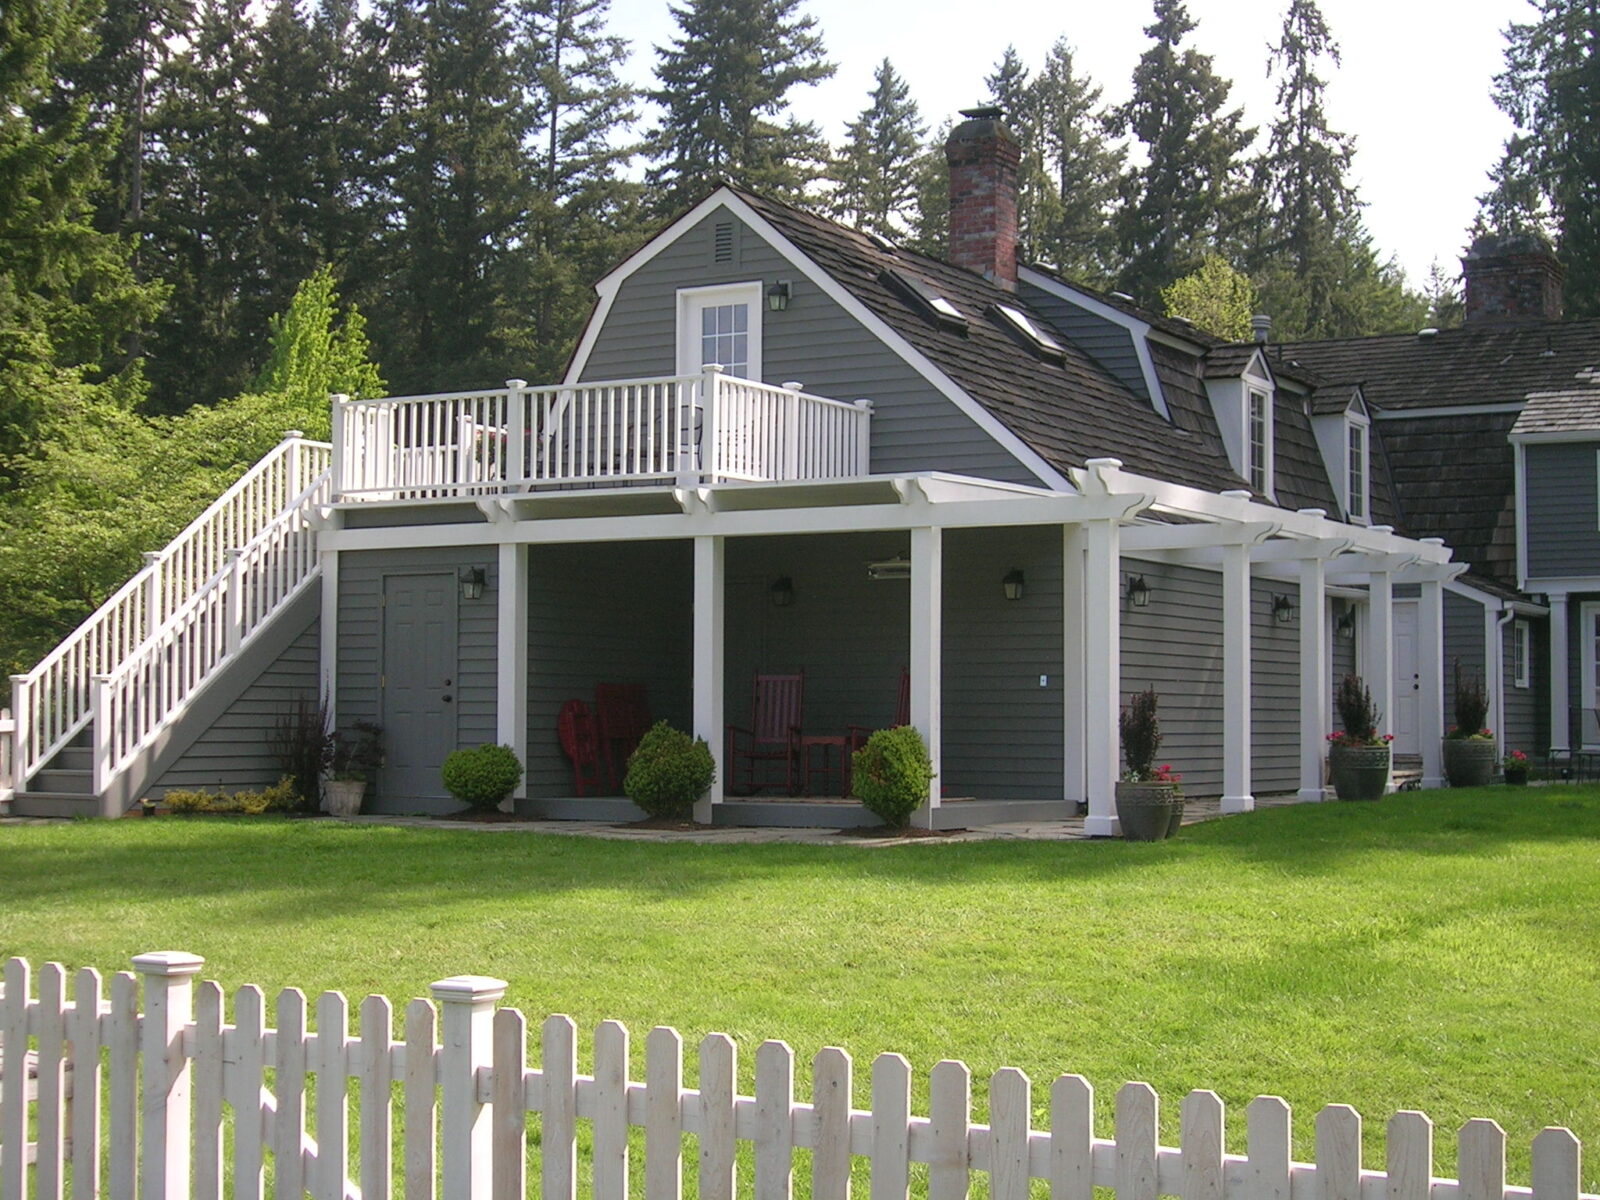 Large gray home with with deck on the back of the house